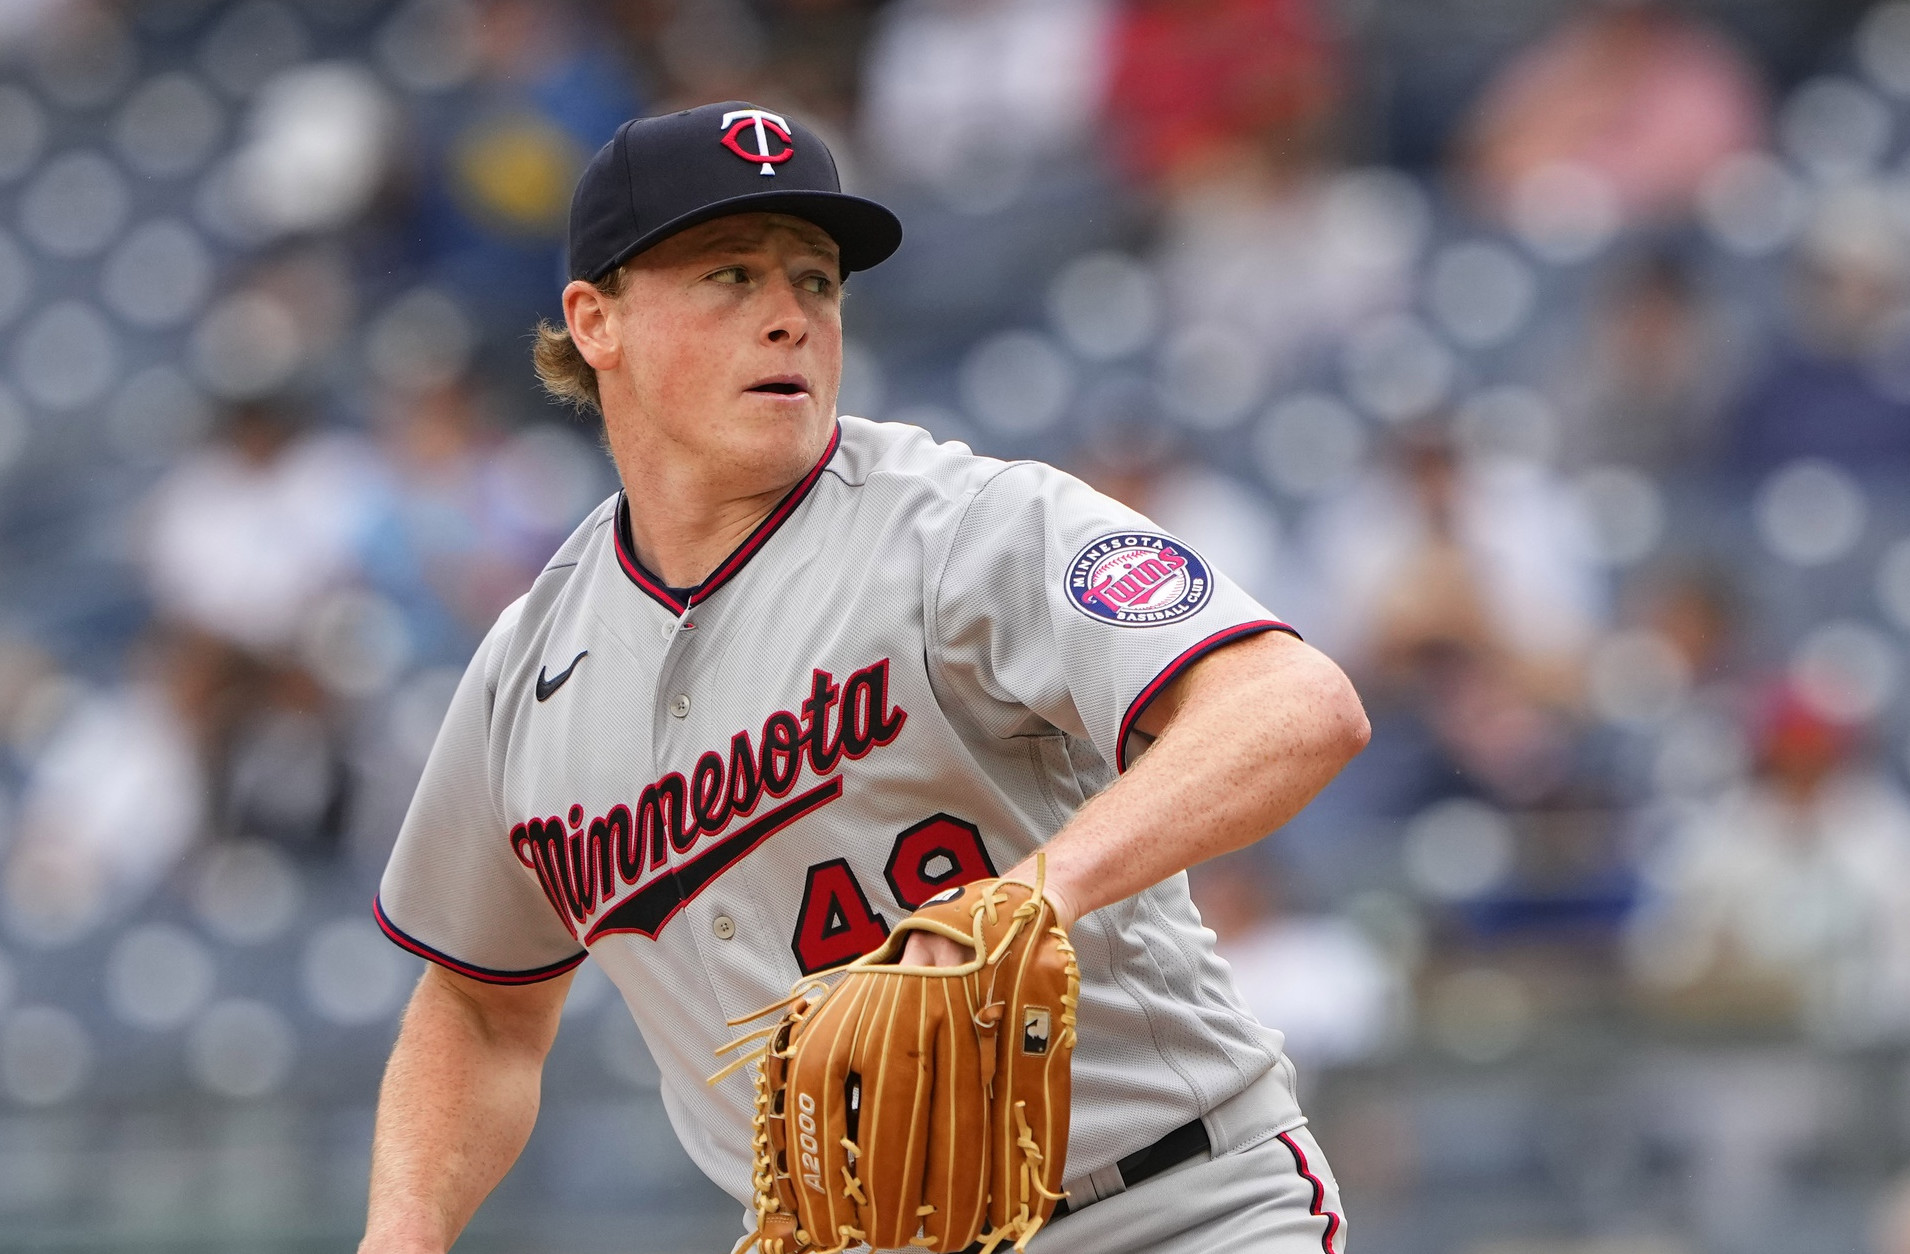 Twins-Yankees rained out; St. Paul's Louie Varland set to make